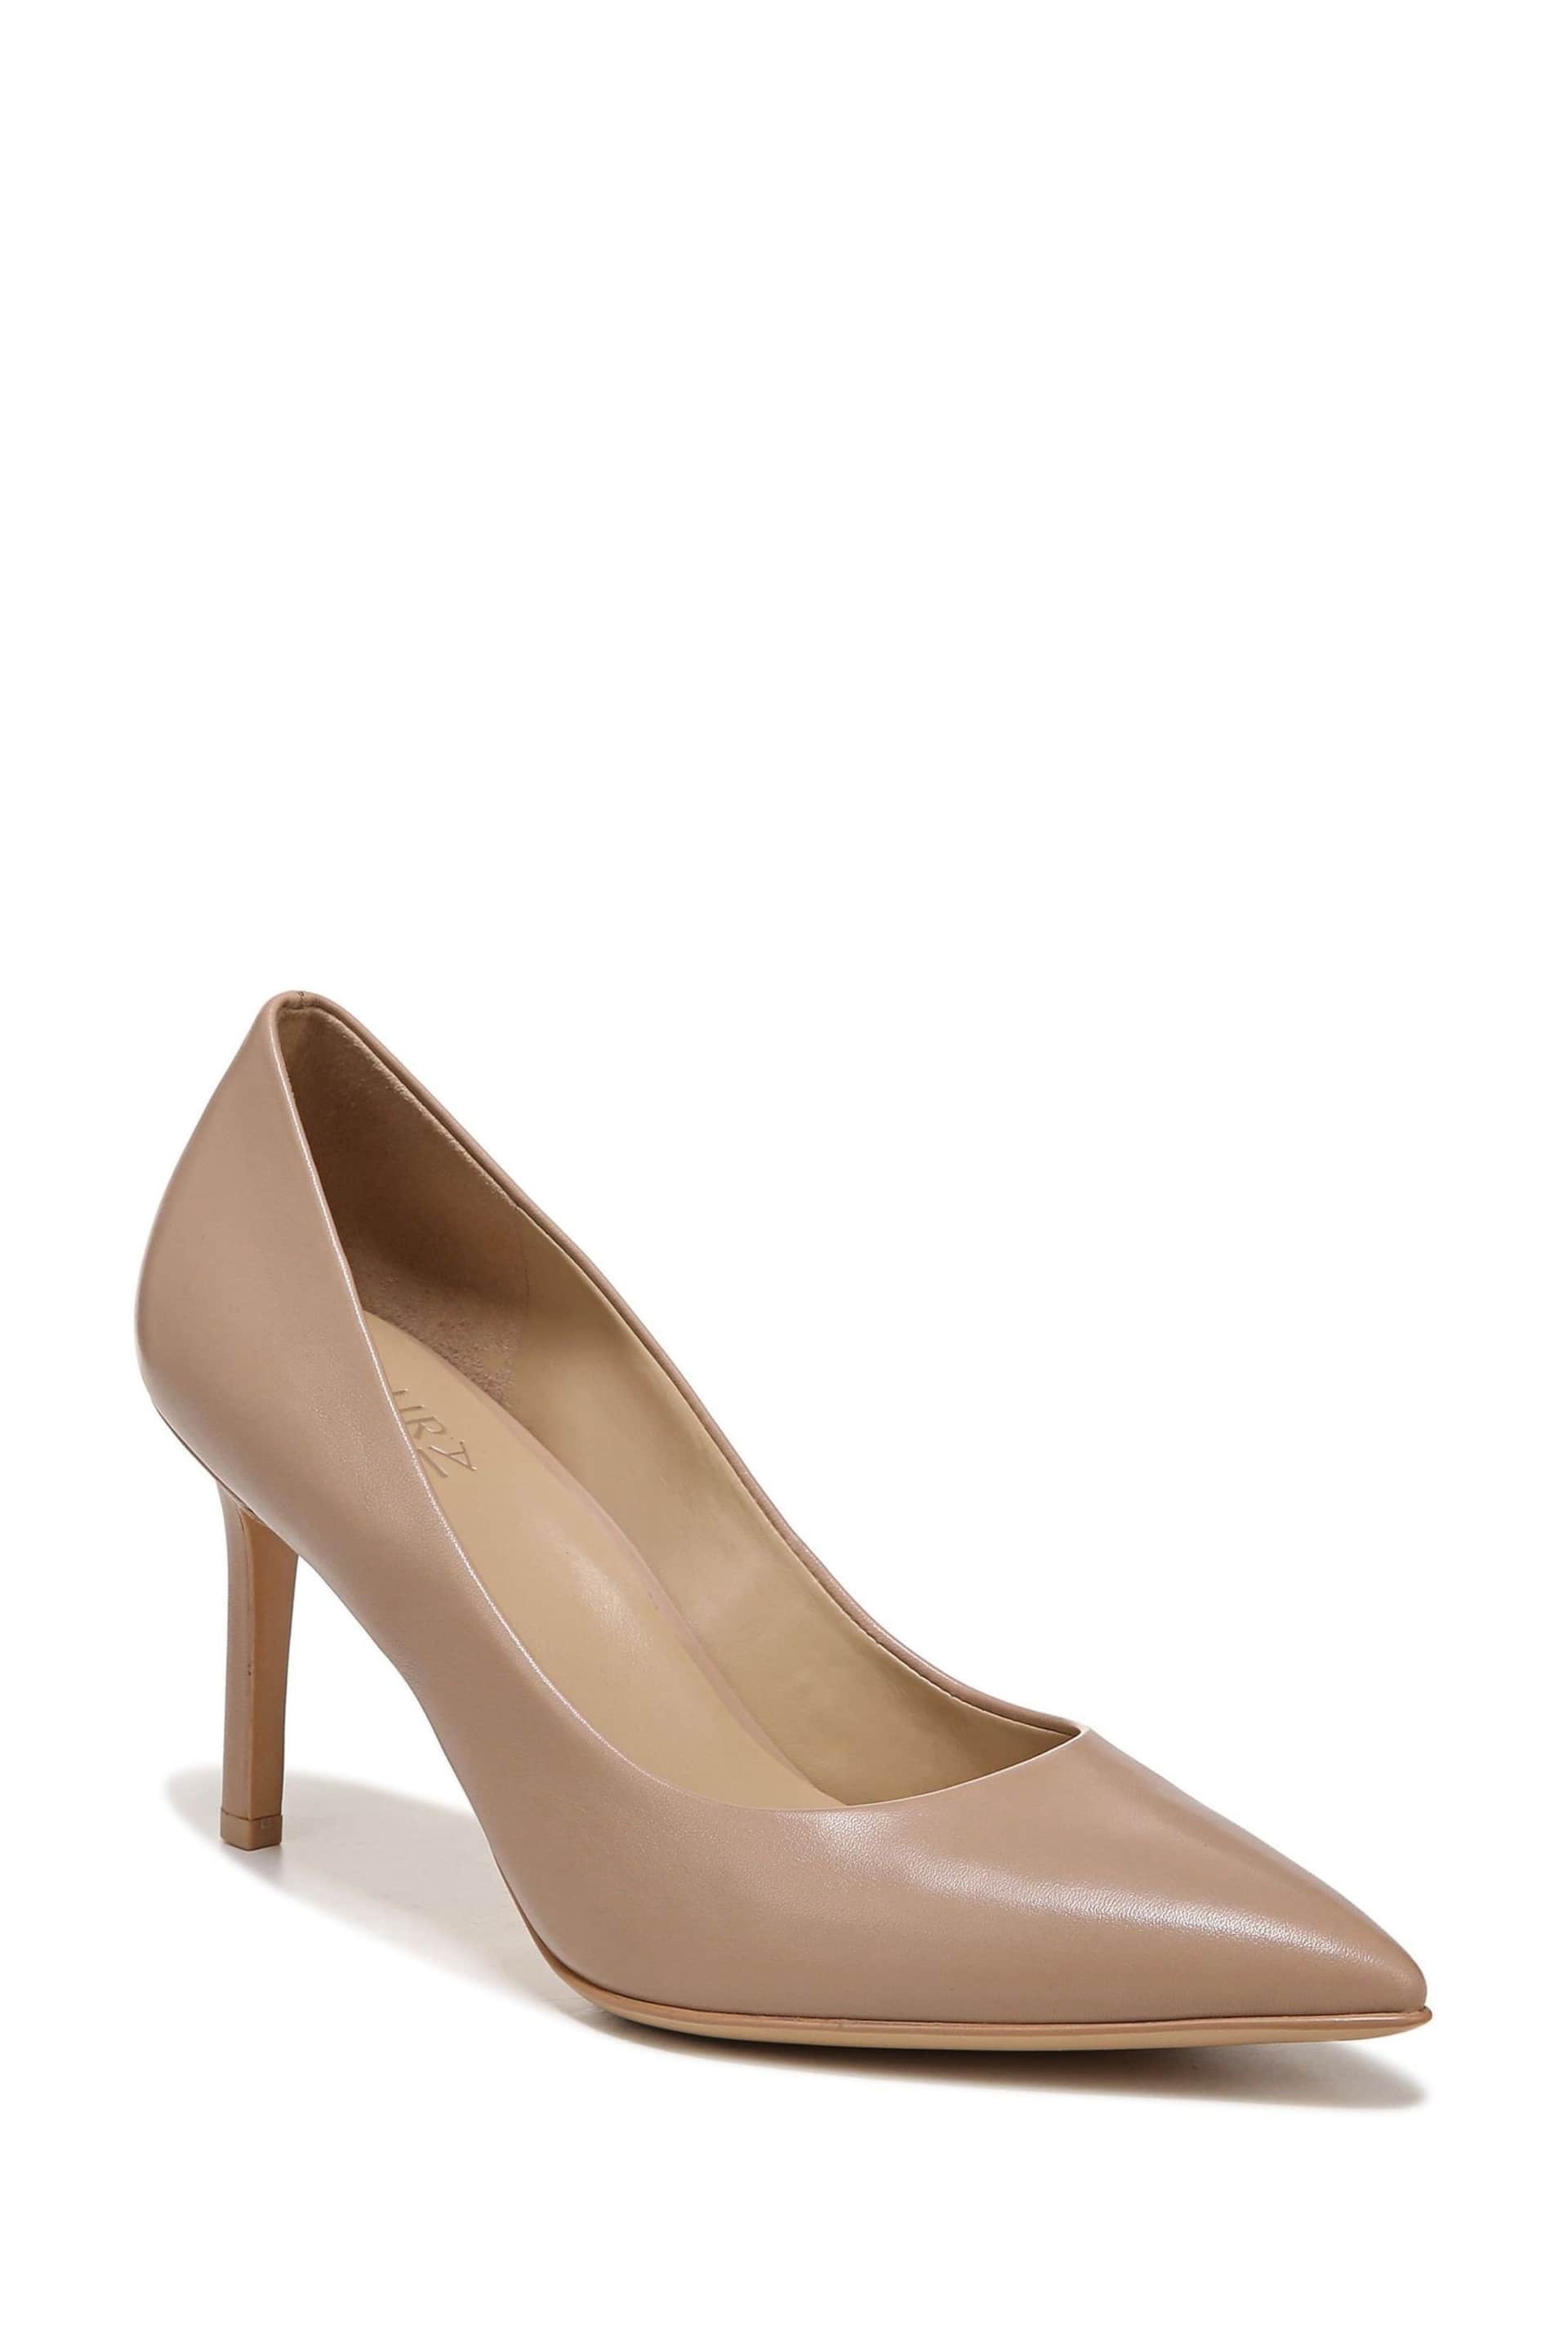 Naturalizer Anna High Heeled Court Shoes - Image 3 of 7